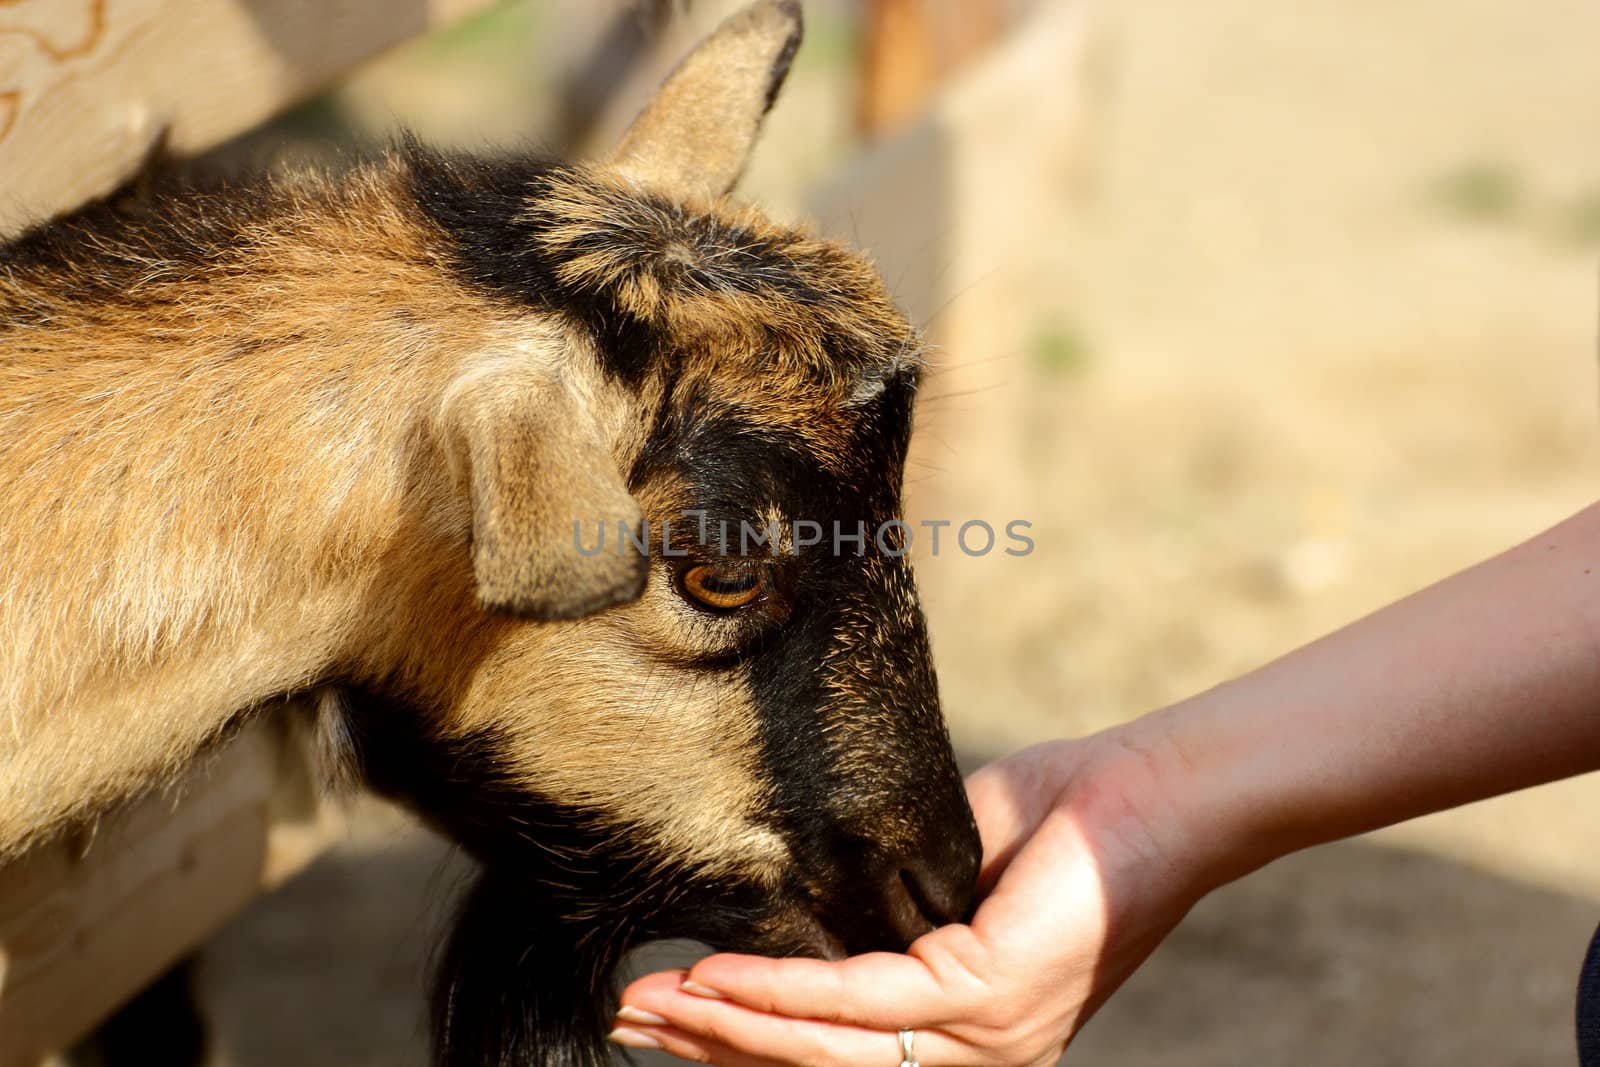 goat eating from hand by taviphoto